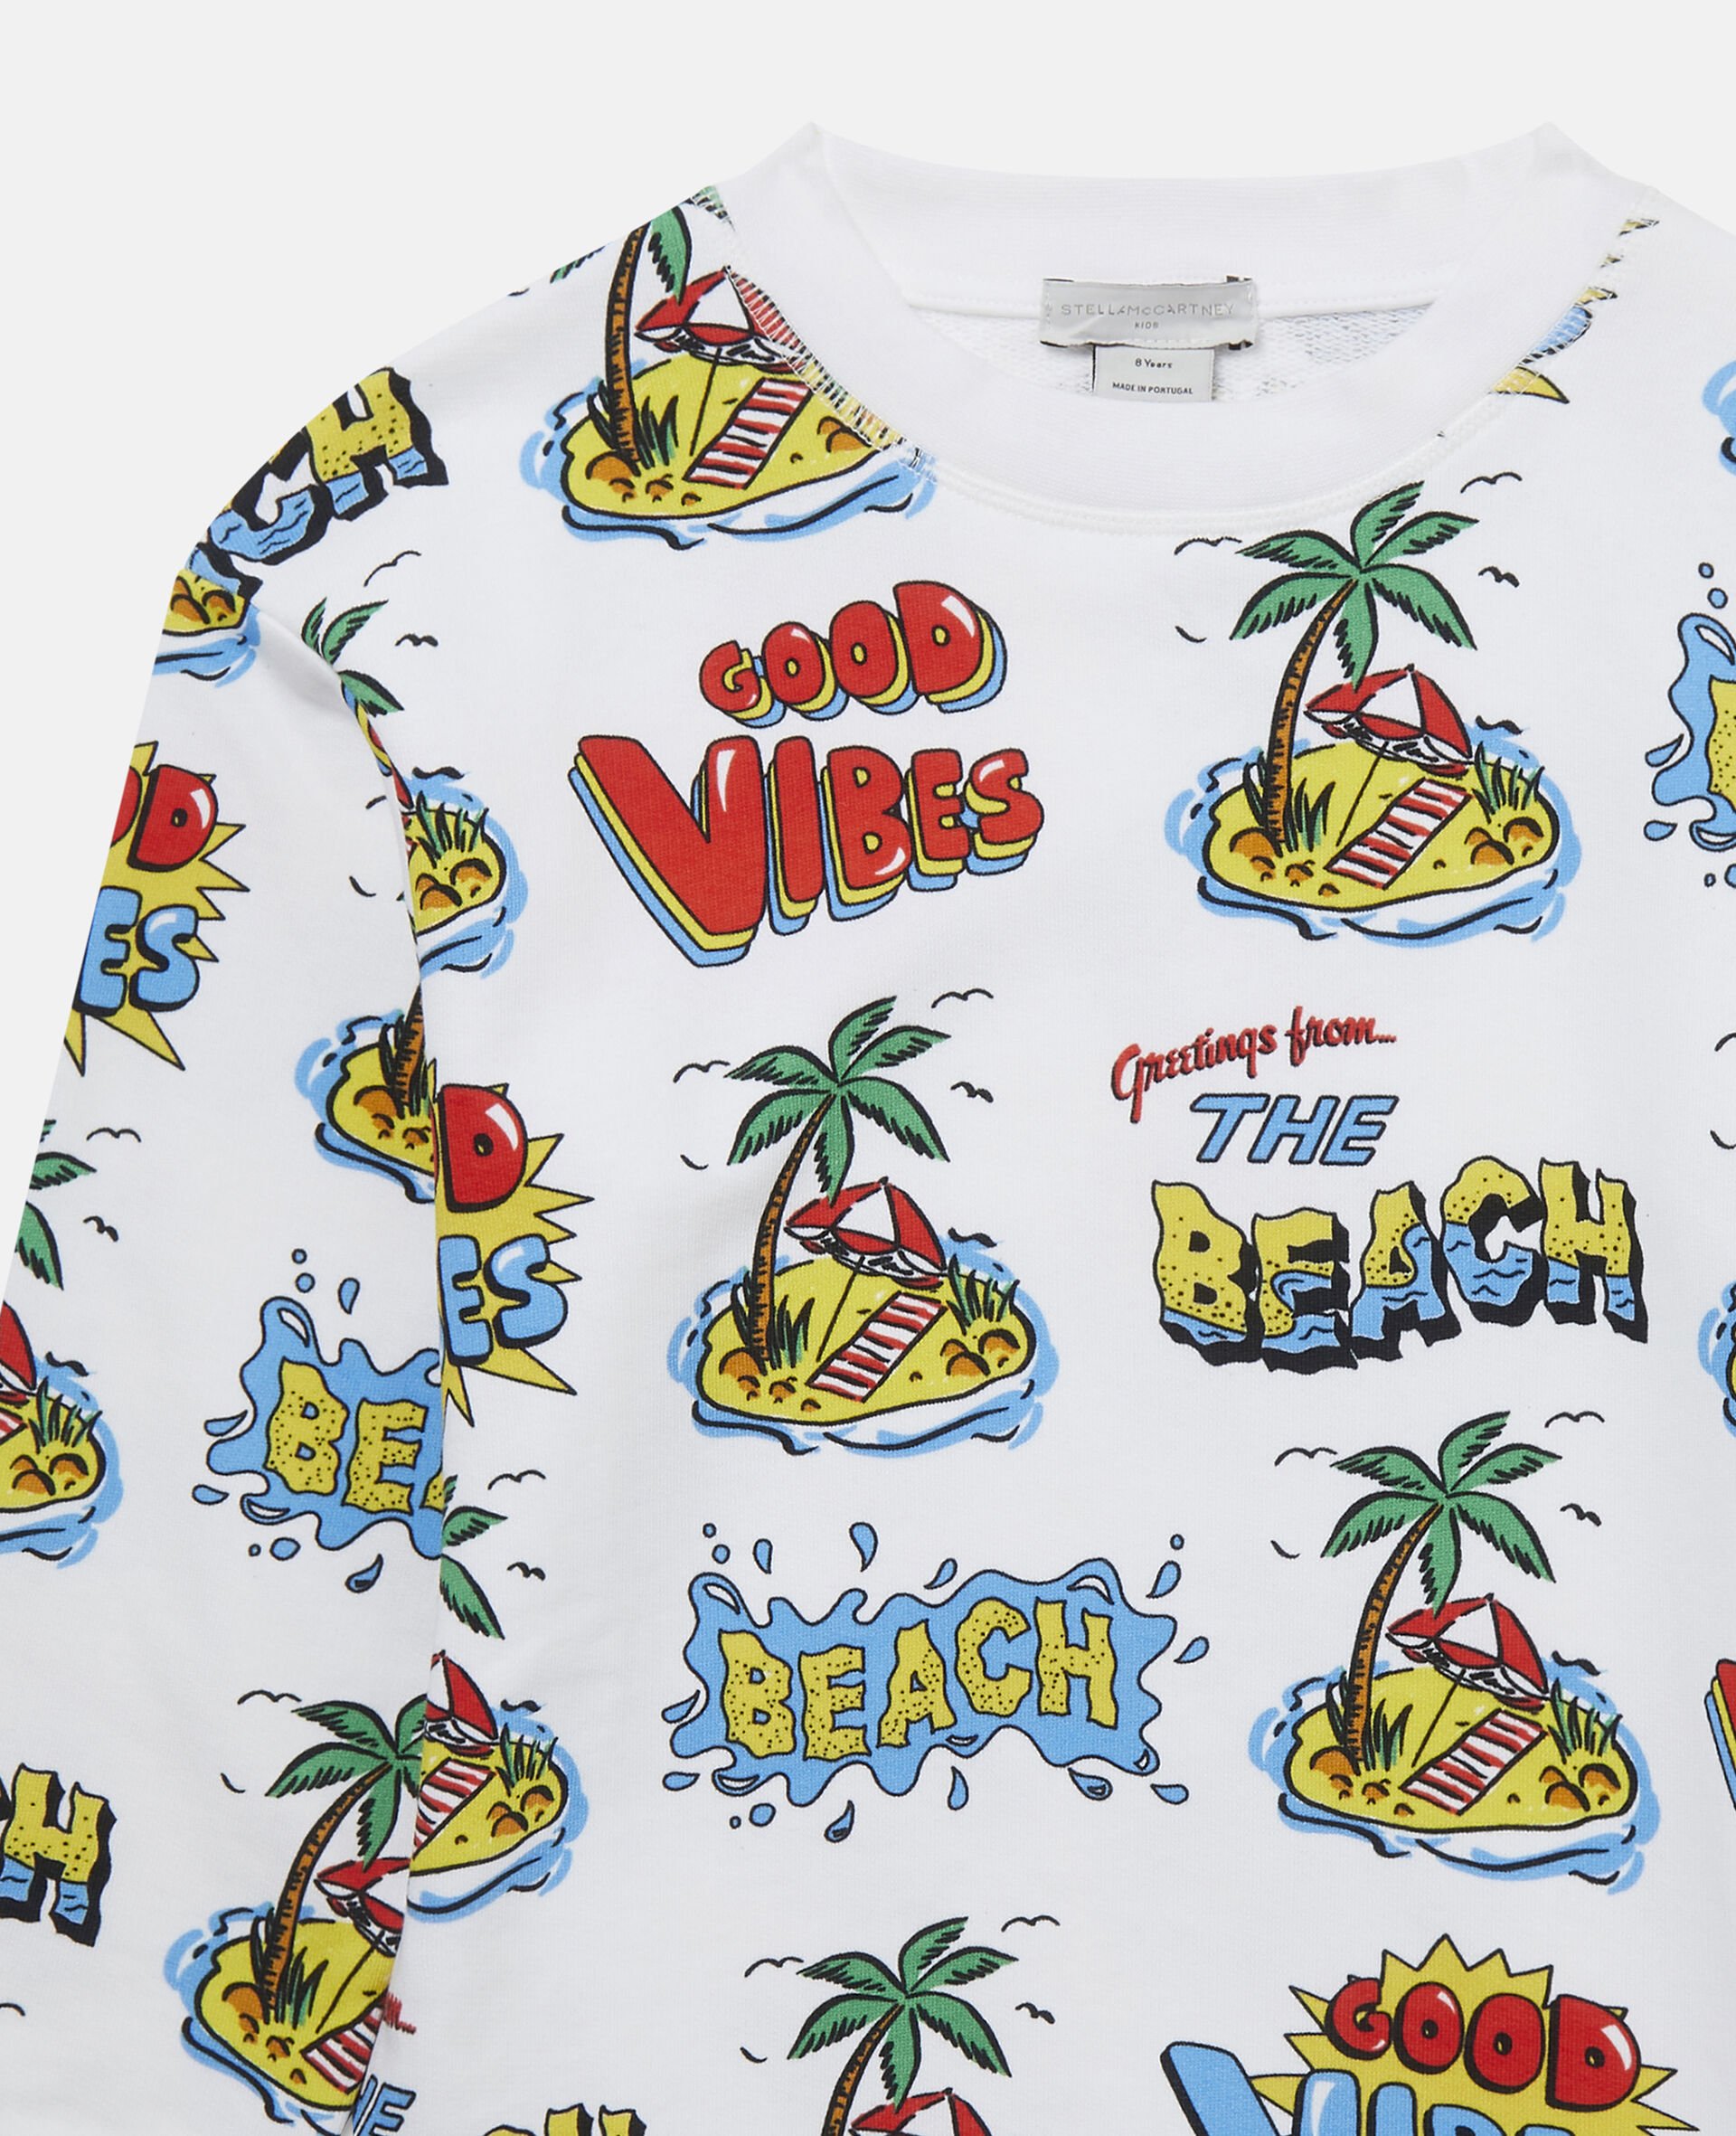 Good Vibes Print All Over Cotton Fleece Sweatshirt -White-large image number 1